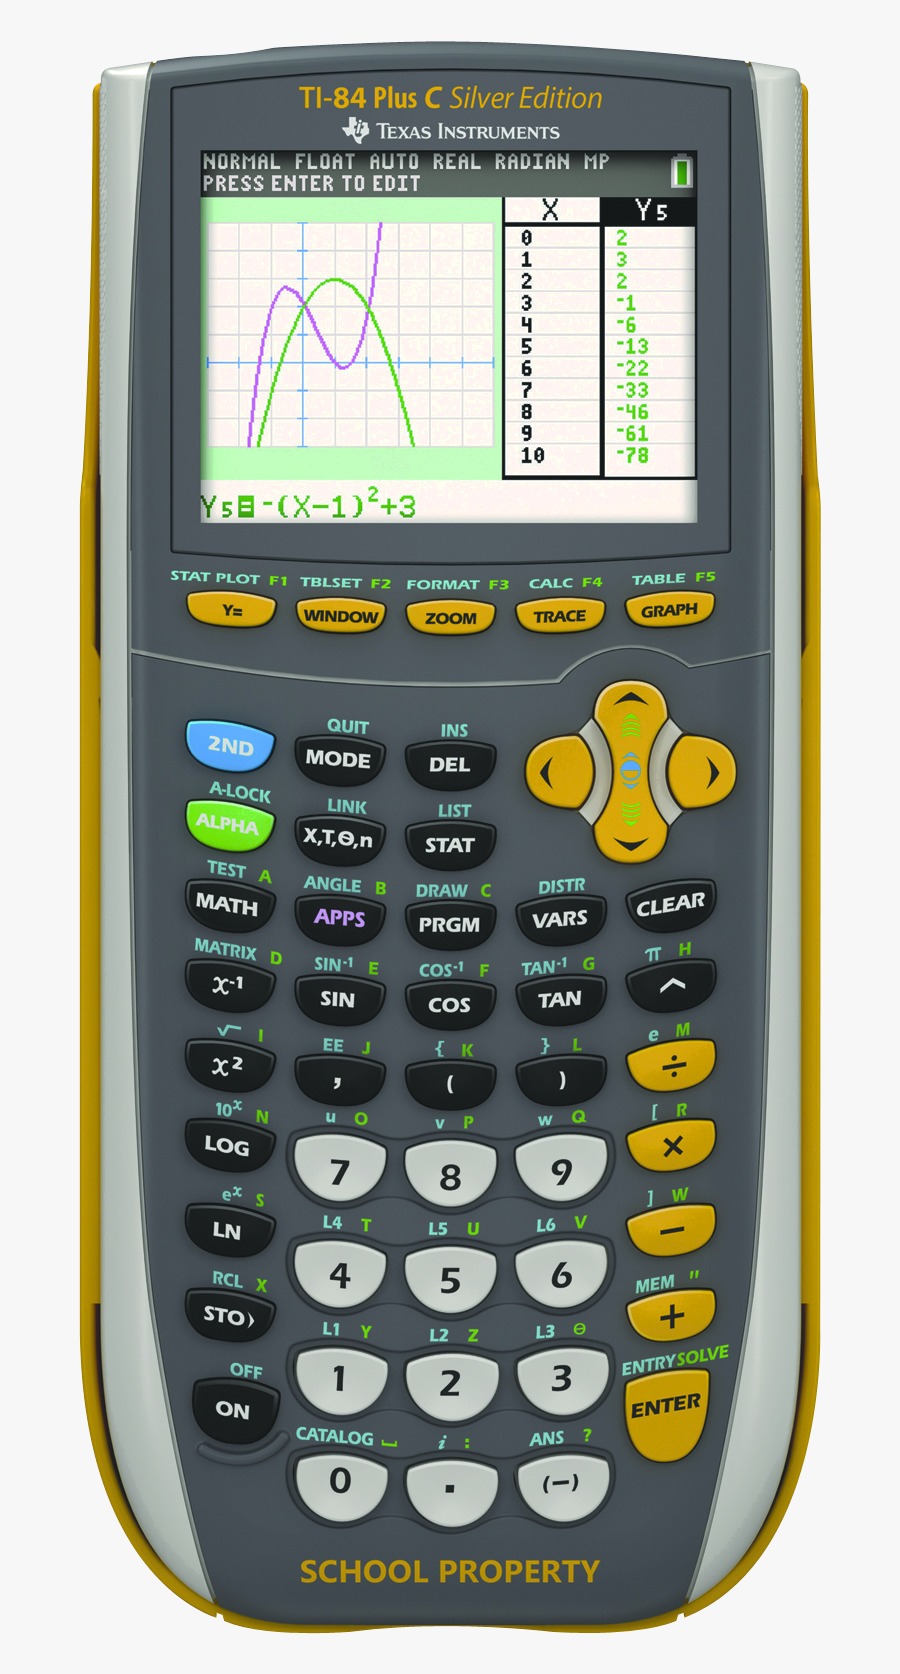 Picture Freeuse Stock Graphing Calculator Clipart - Ti 84 Plus C Silver Edition Yellow, Transparent Clipart